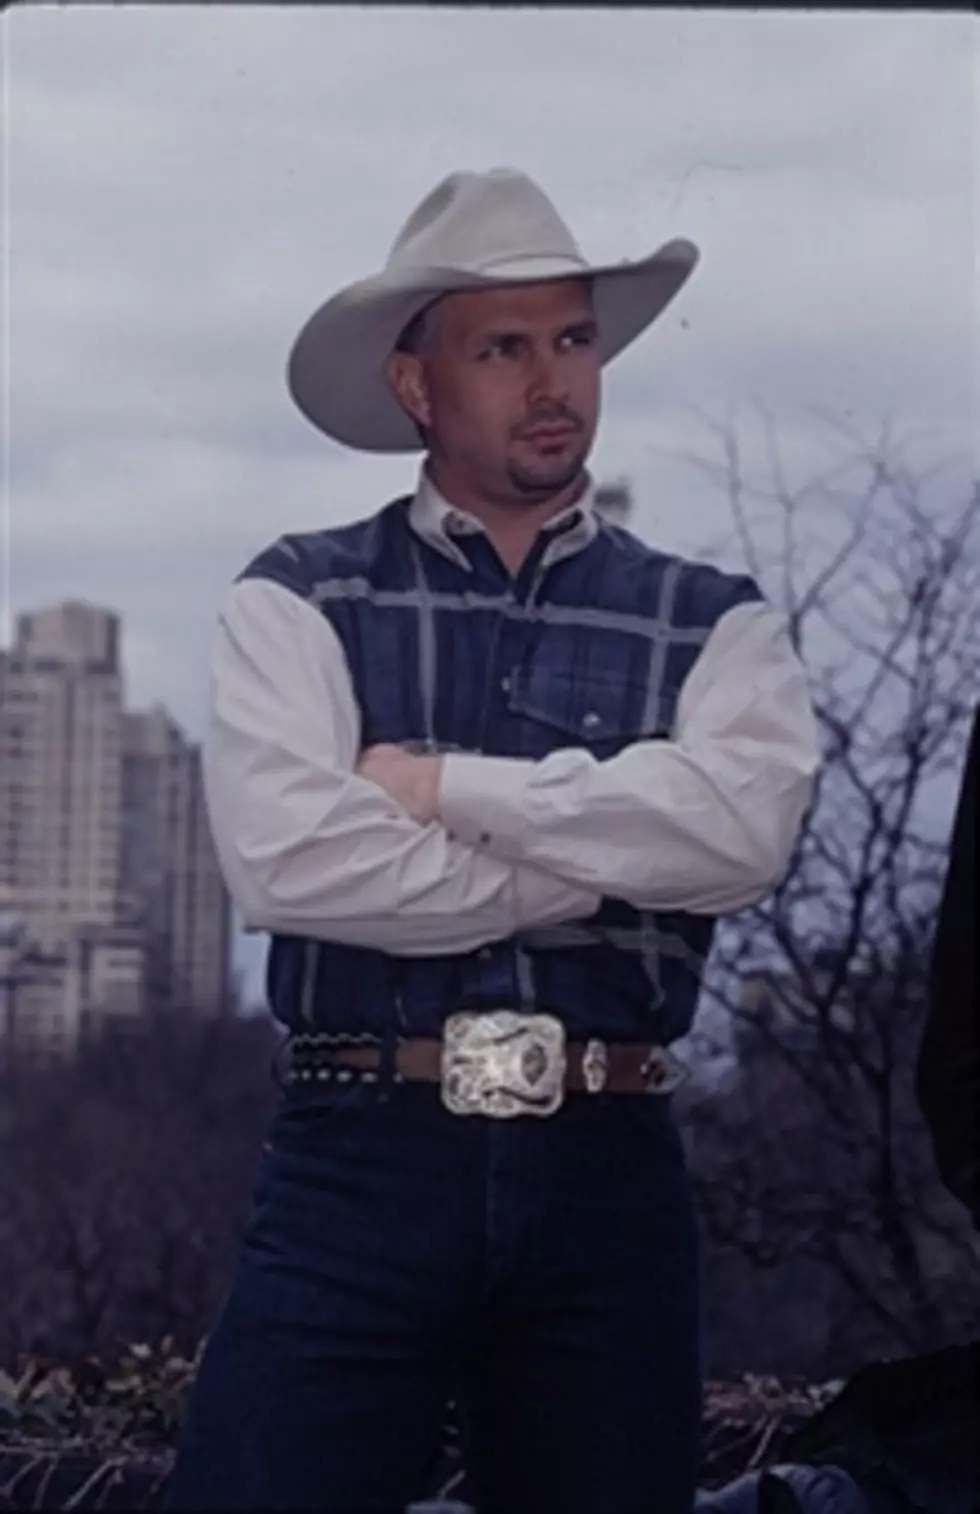 Questions for Garth Brooks From “Riley & Scot” [VIDEO]